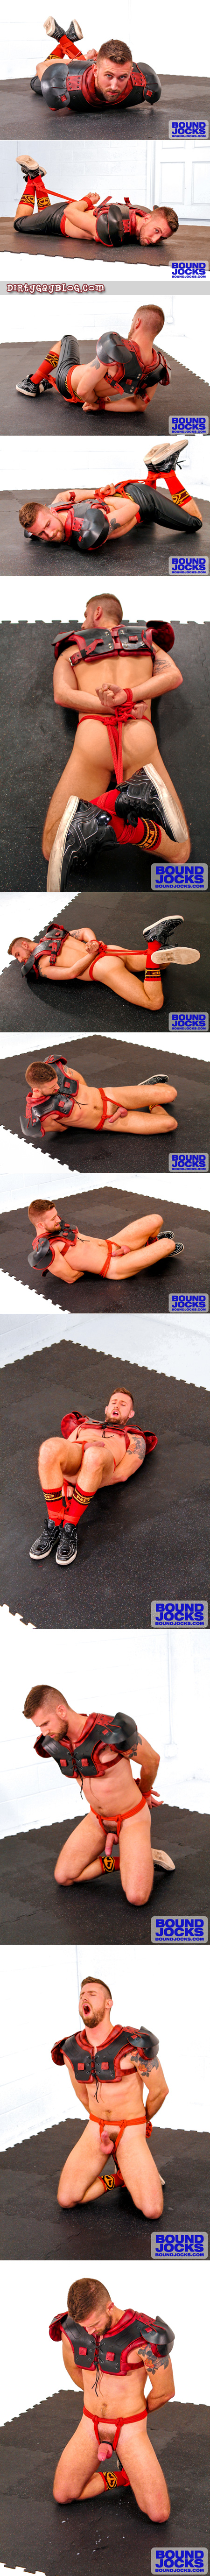 Blonde football player with a beard is hogtied in his uniform and gives himself an orgasm using the ropes.